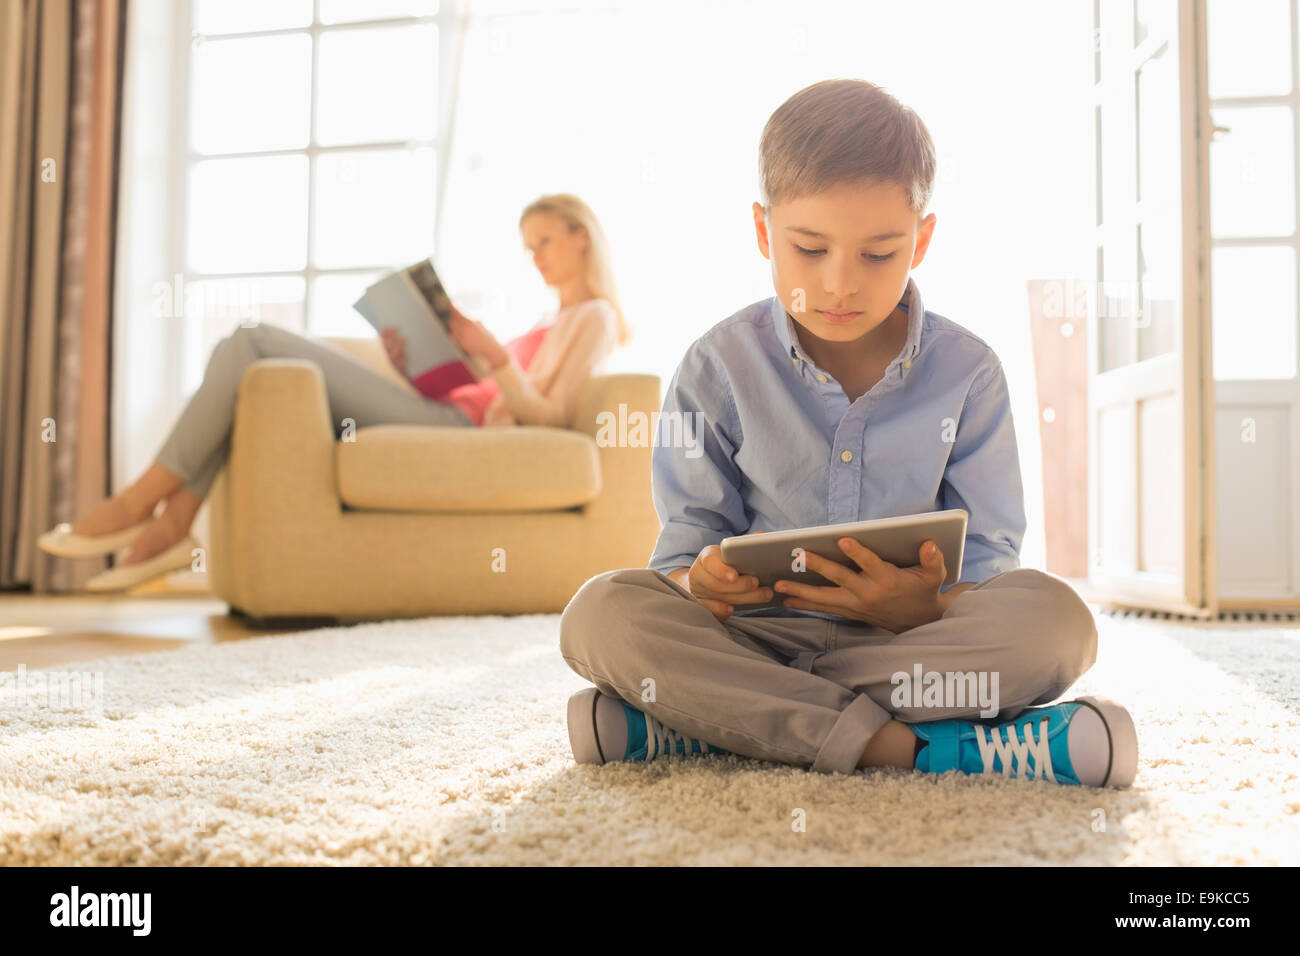 Boy using digital tablet on floor with mother reading magazine in background Stock Photo